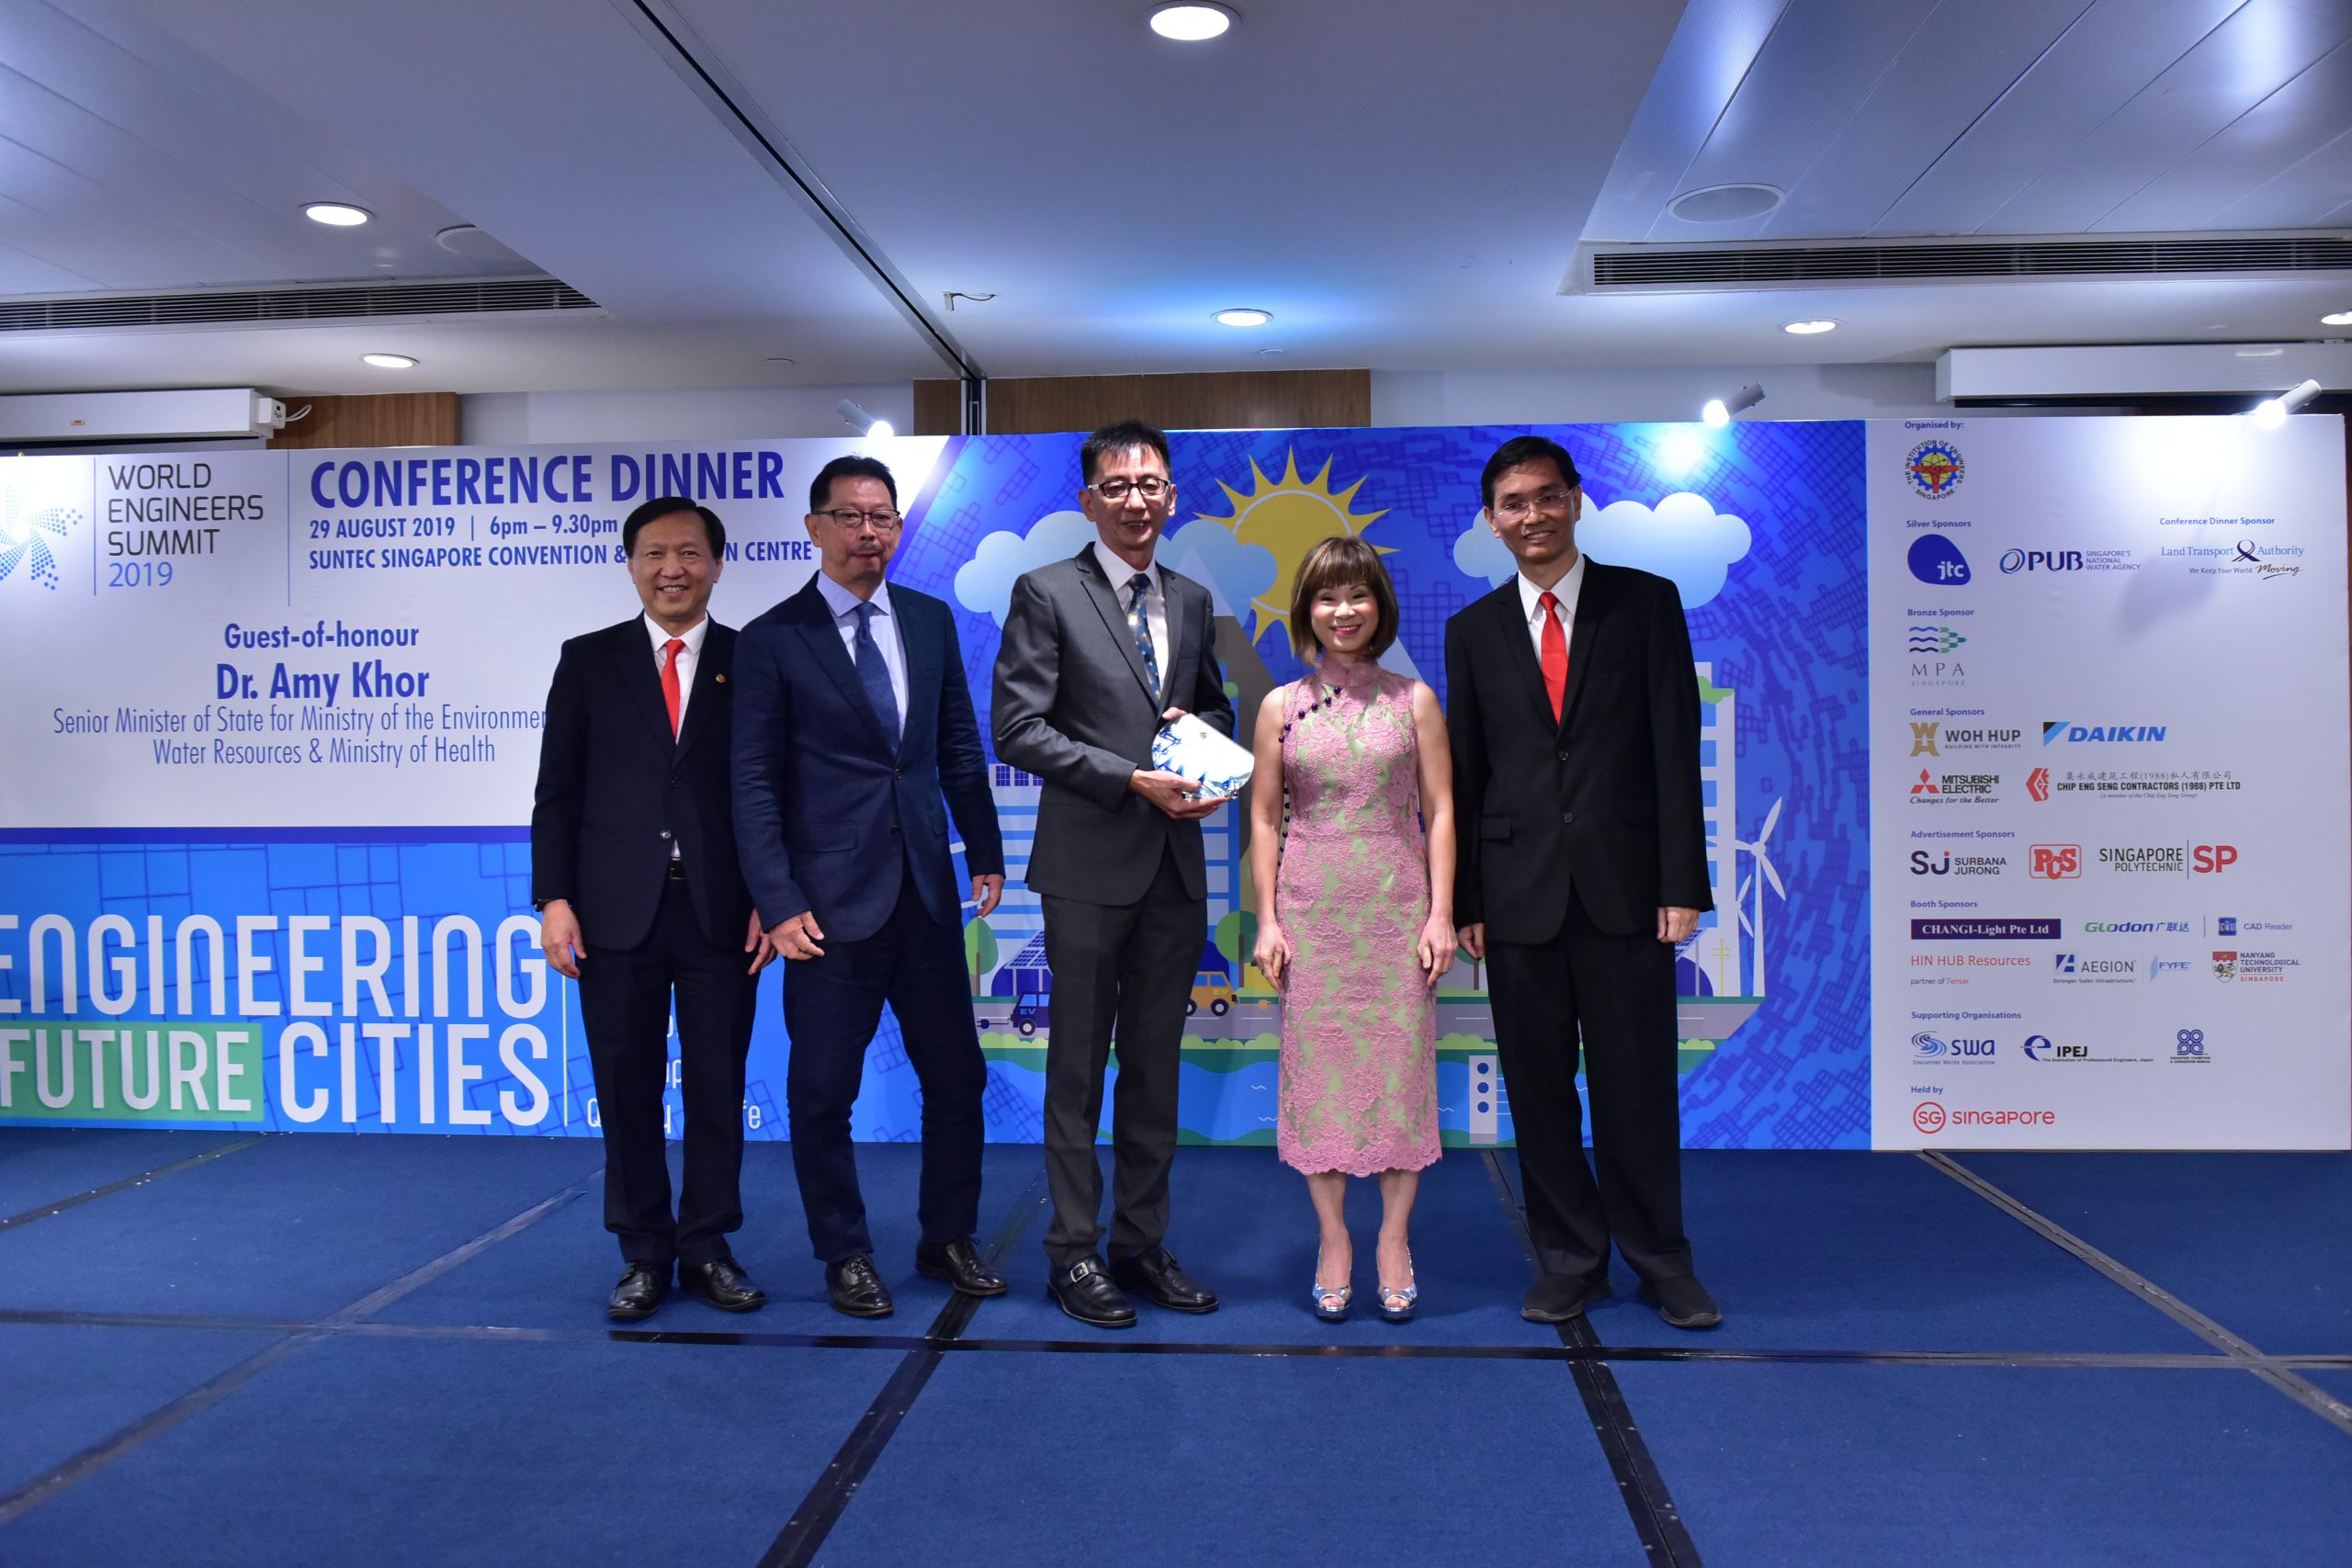 <div>Associate Professor Chua Kian Jon, Ernest and his industrial collaborators receiving the Prestigious Engineering Achievement Award 2019. From left: Professor Yeoh Lean Weng (President of IES,</div><div>Singapore); Mr Liam Kok Aeng (Ecoline Solar); Mr Colin Chia (Ecoline Solar); Dr Amy Khor (Senior Minister of State in the Ministry of Health and Ministry of the Environment and Water Resources)</div><div>and Associate Professor Chua Kian Jon, Ernest.</div>